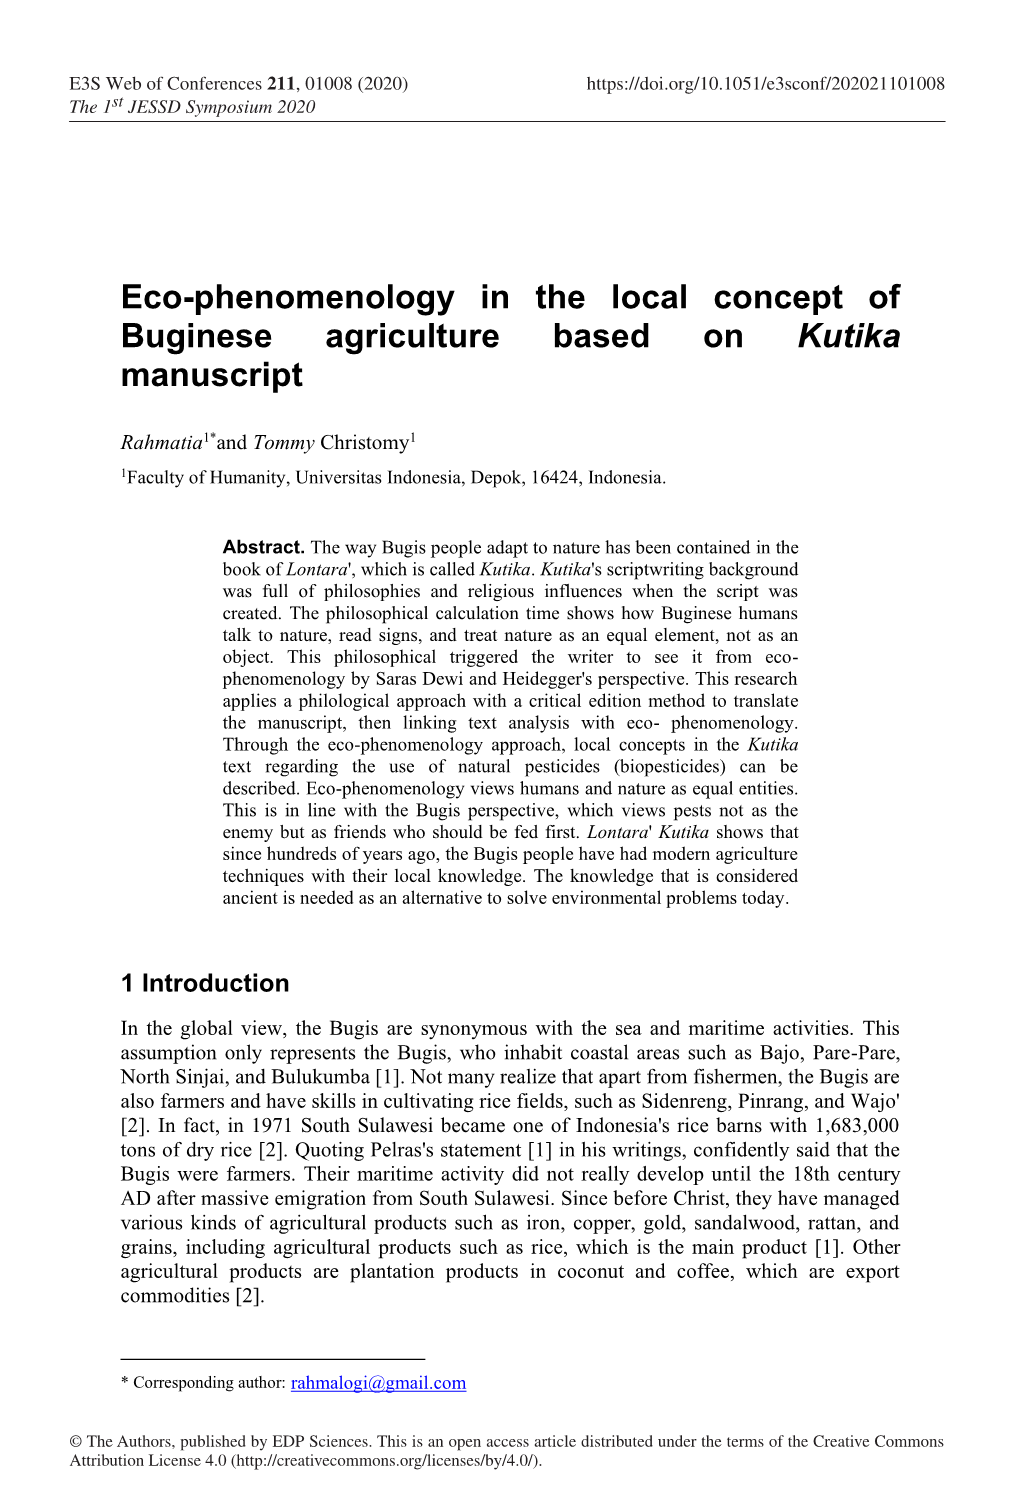 Eco-Phenomenology in the Local Concept of Buginese Agriculture Based on Kutika Manuscript